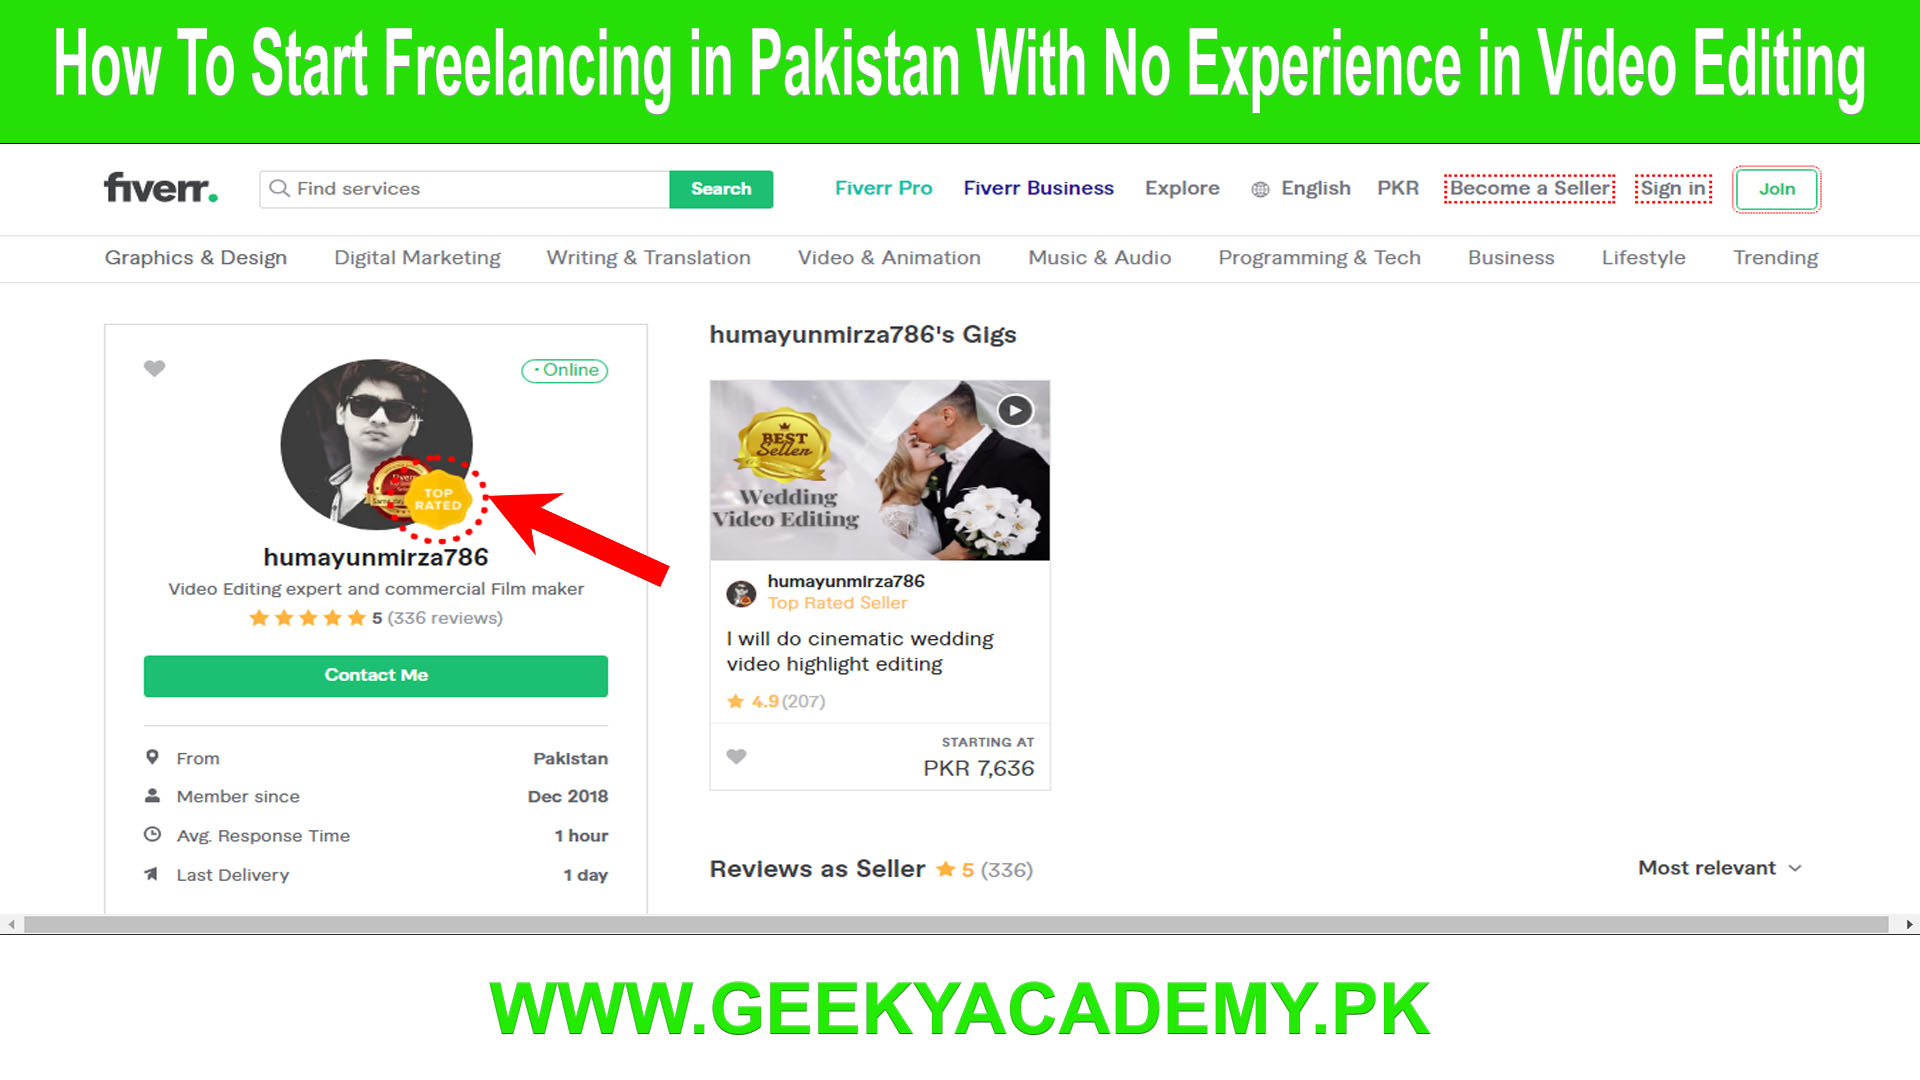 How To Start Freelancing in Pakistan With No Experience in Video Editing, humayunmirza786